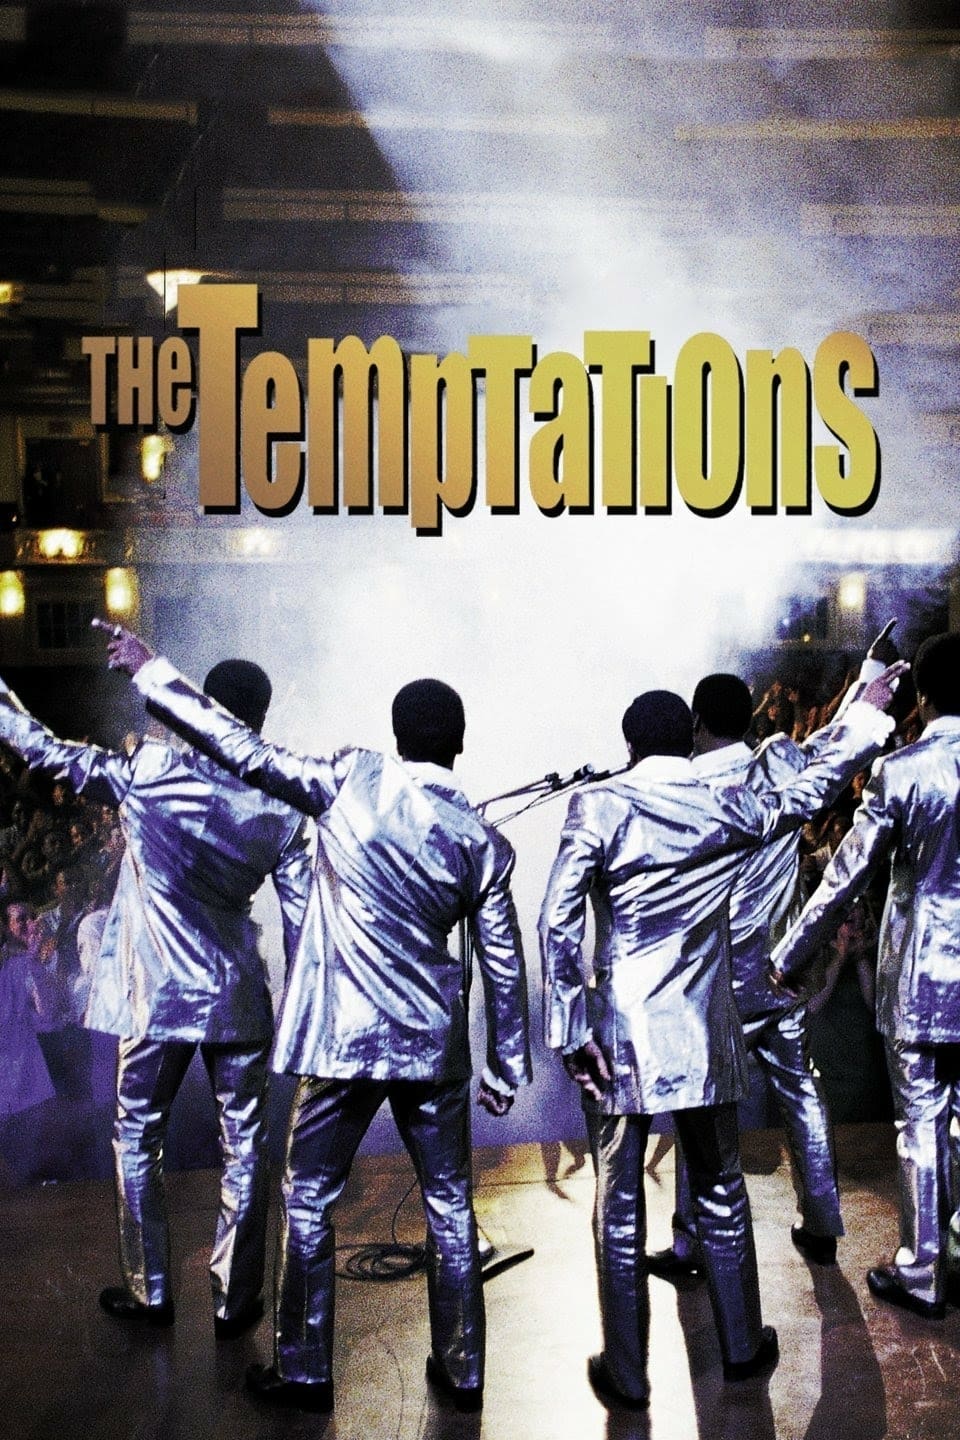 dee roland add watch the temptations free photo